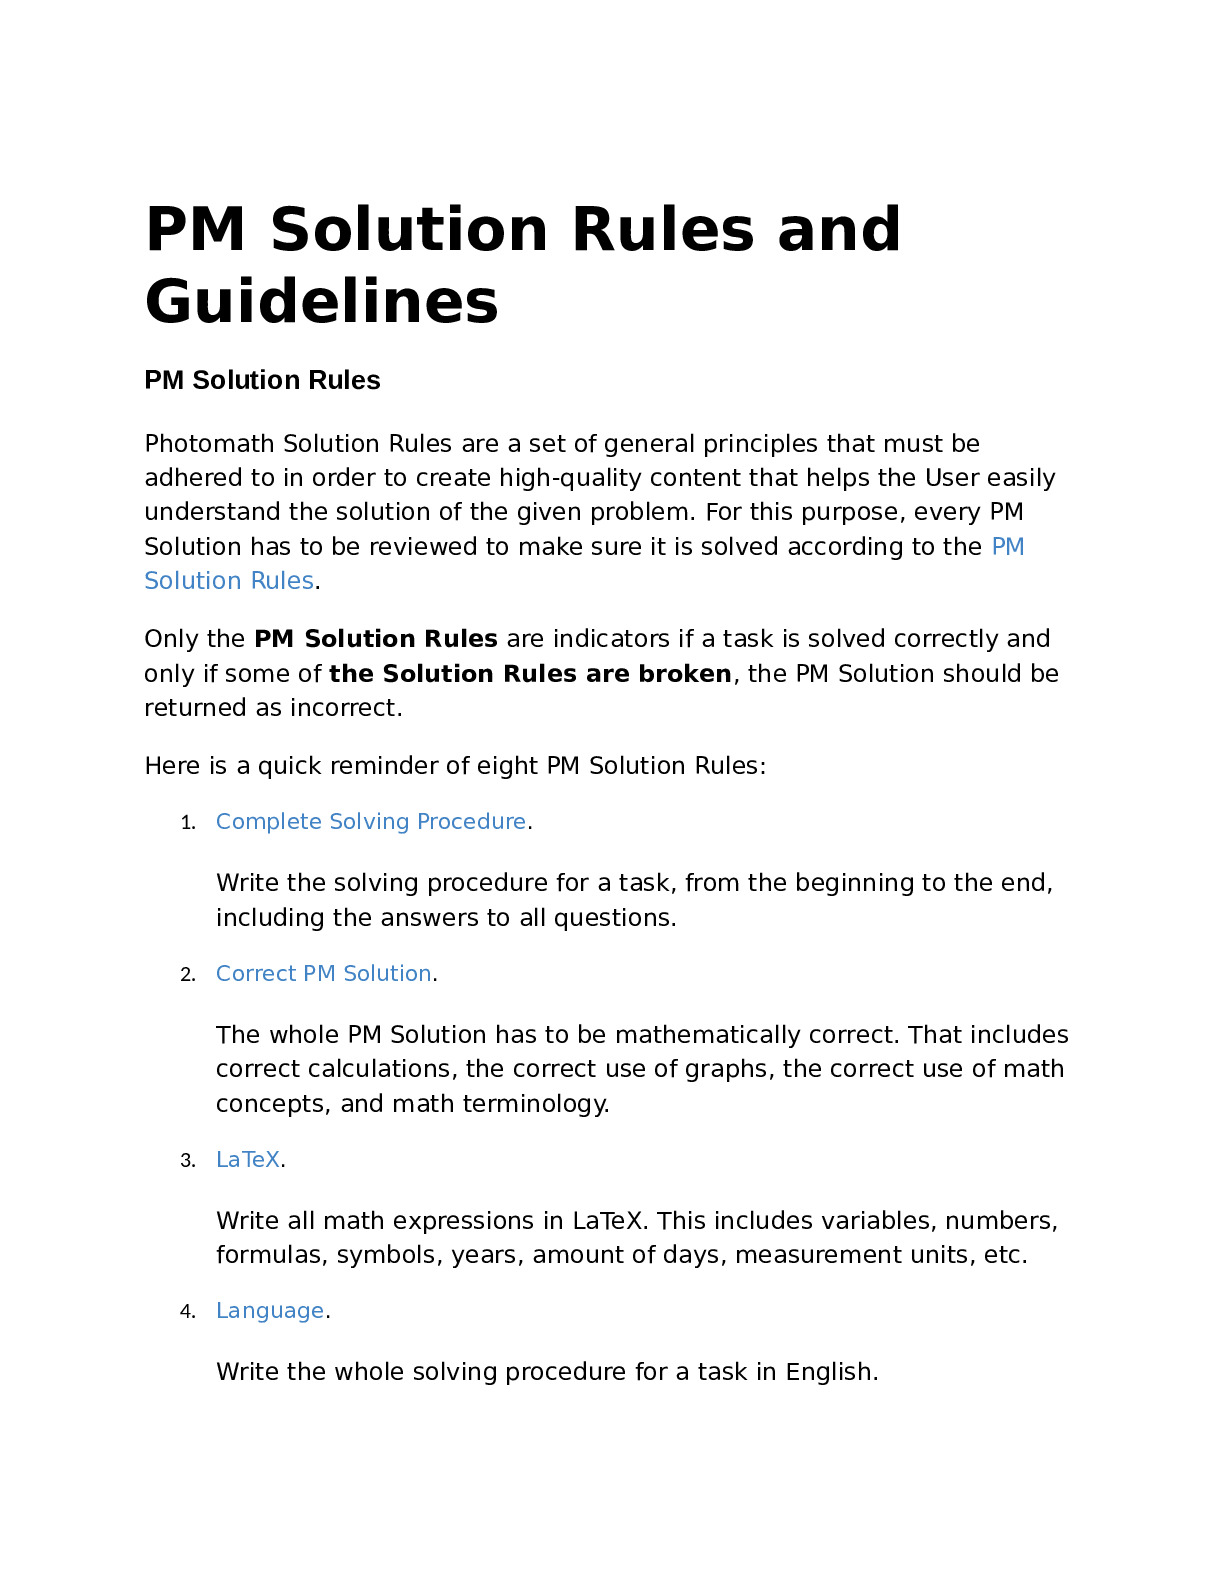 PM_Solution_Rules_and_Guidelines.docx